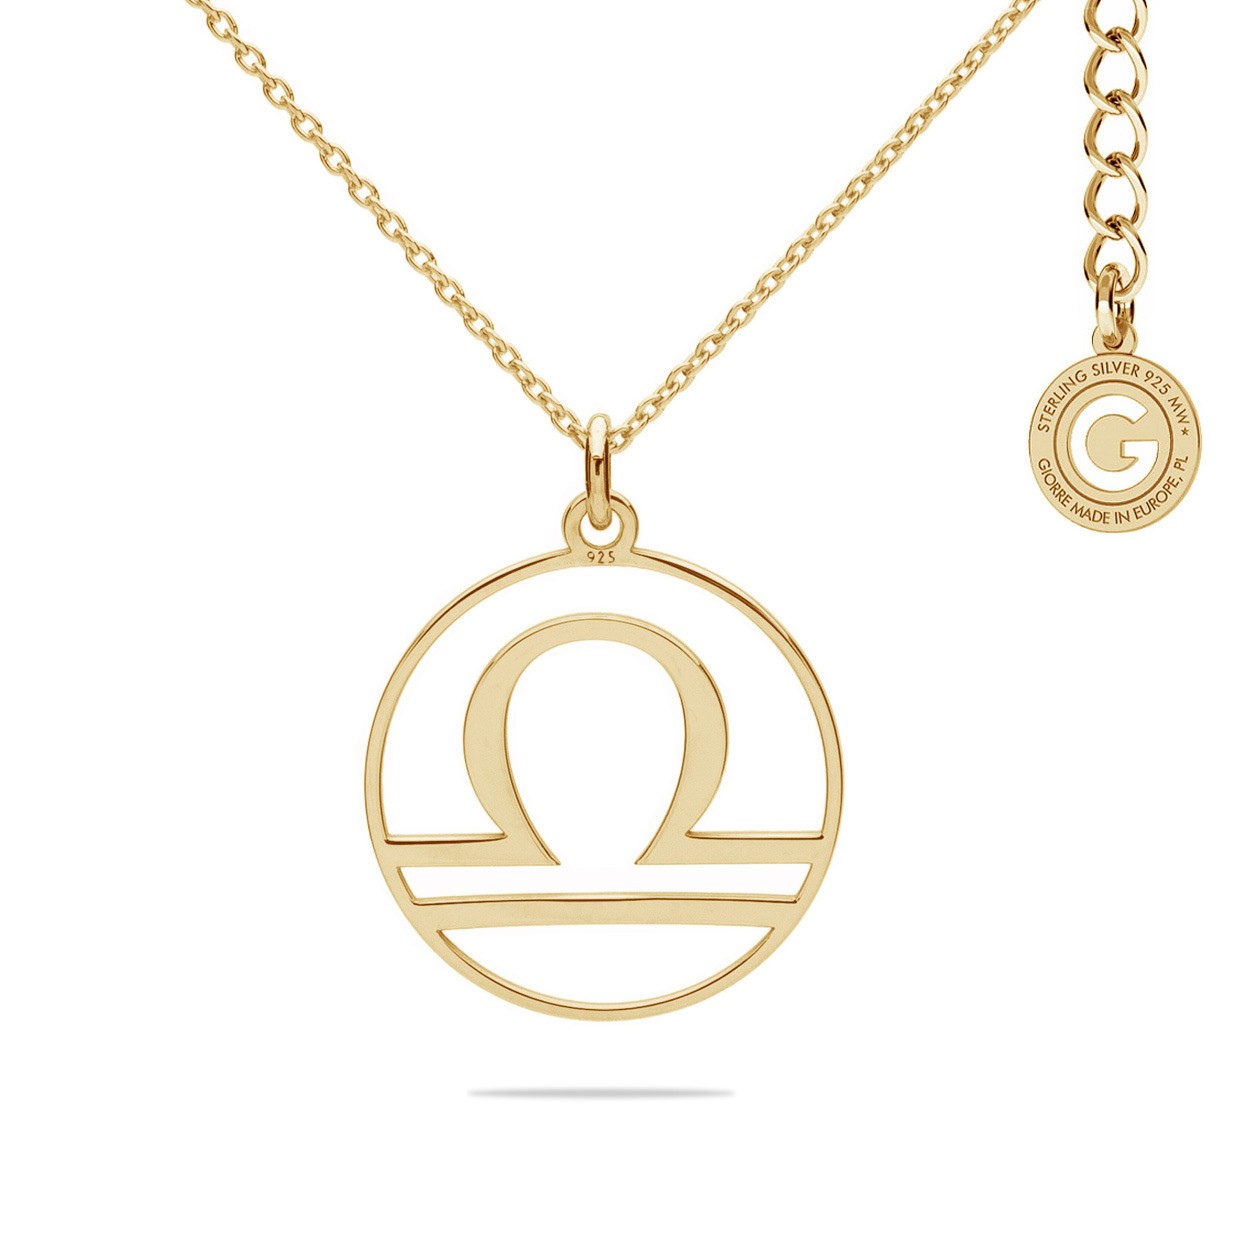 Giorre Woman's Necklace 32493